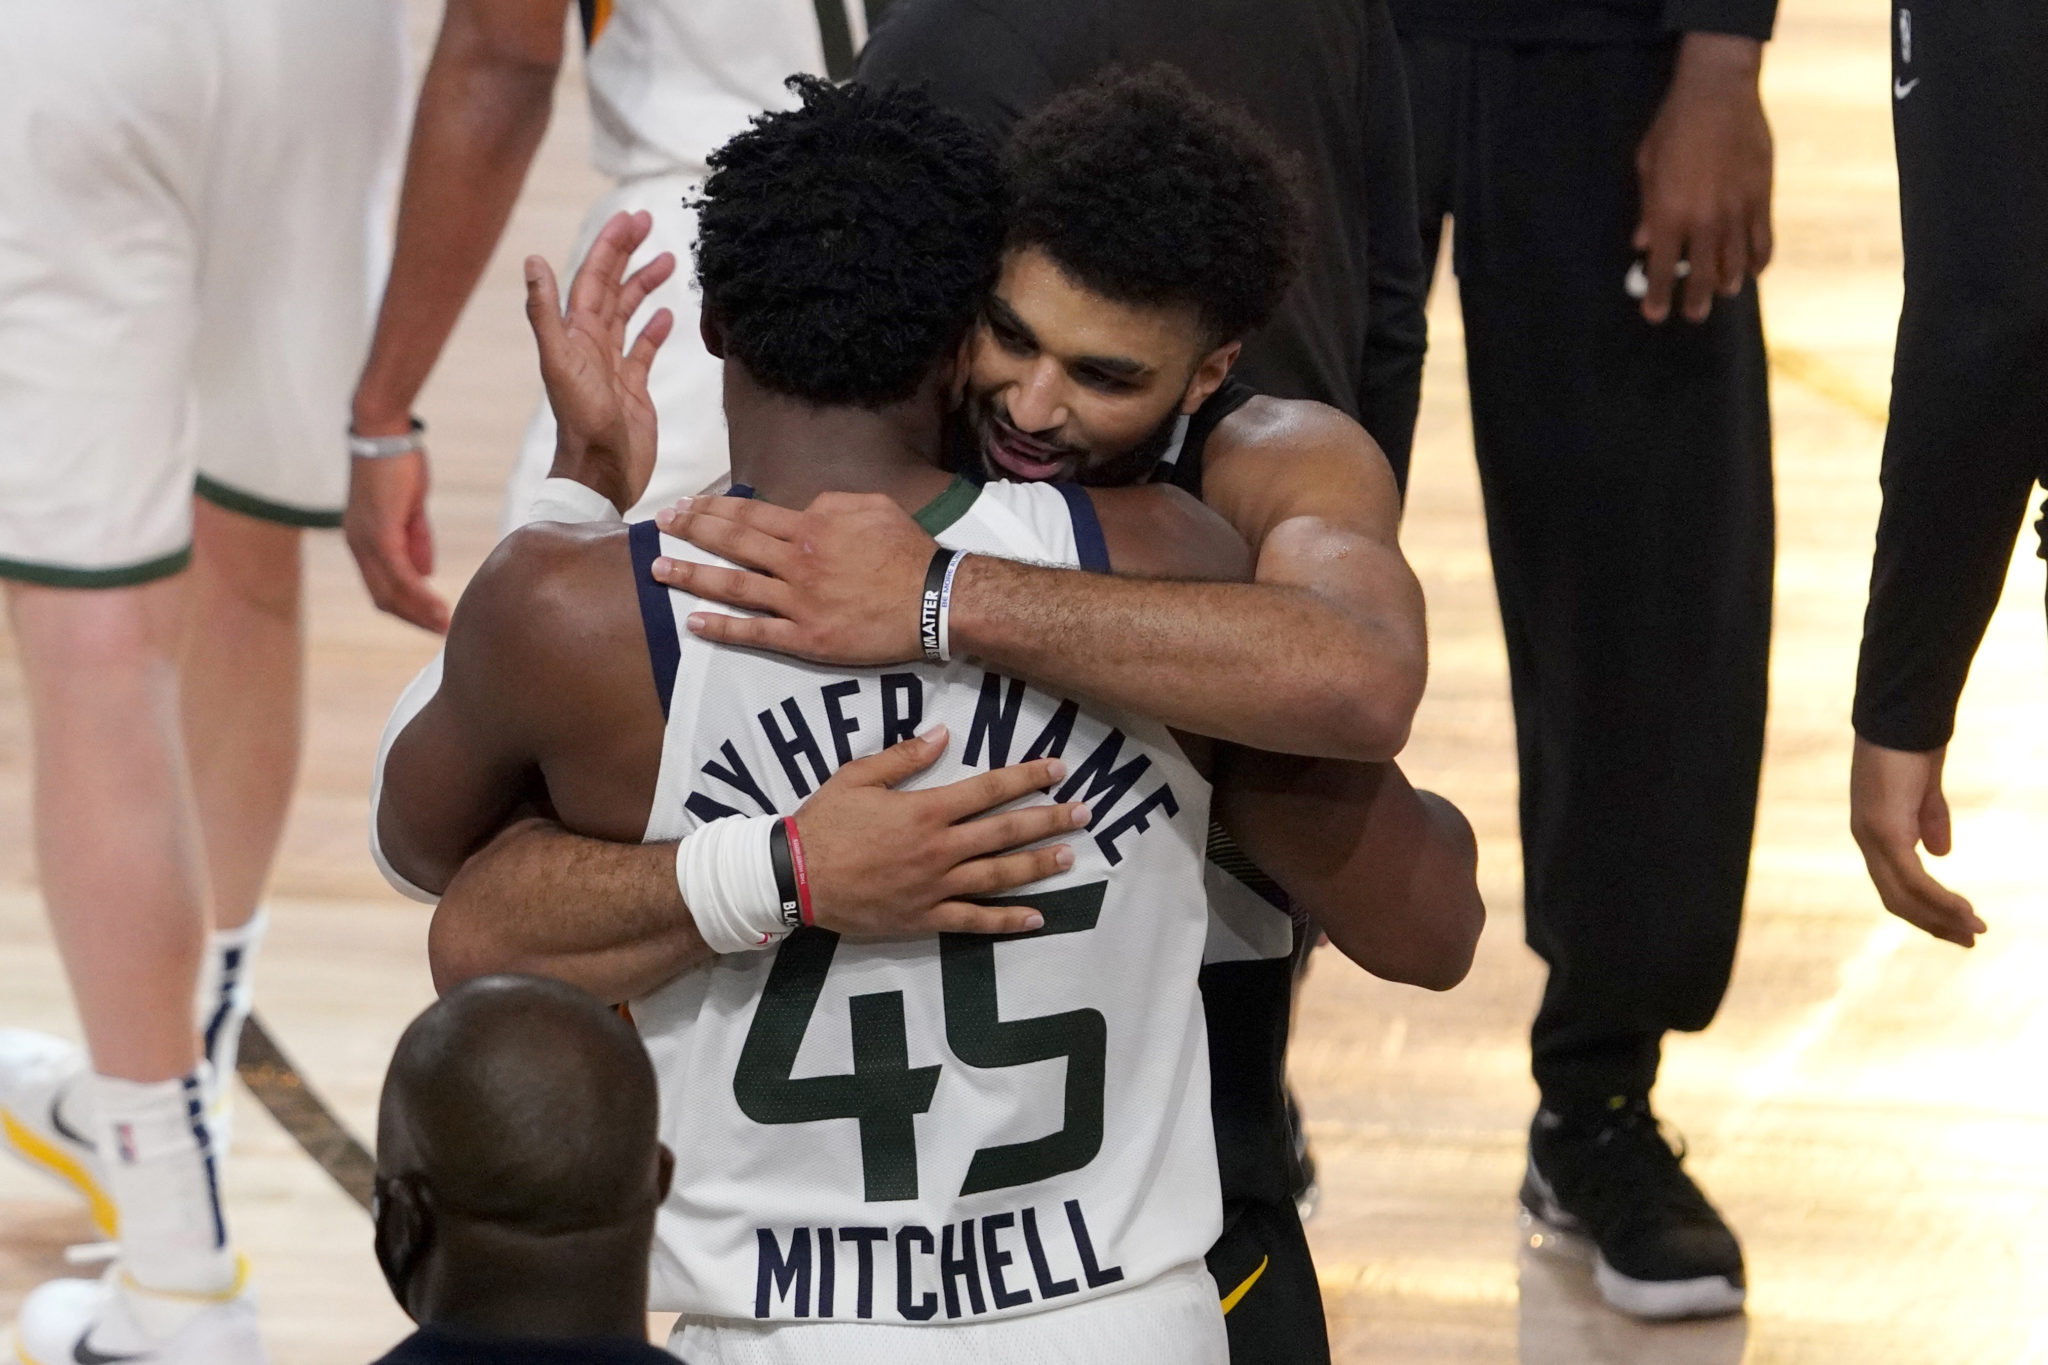 Jamal Murray and Donovan Mitchell embrace after their NBA first round playoff basketball game.